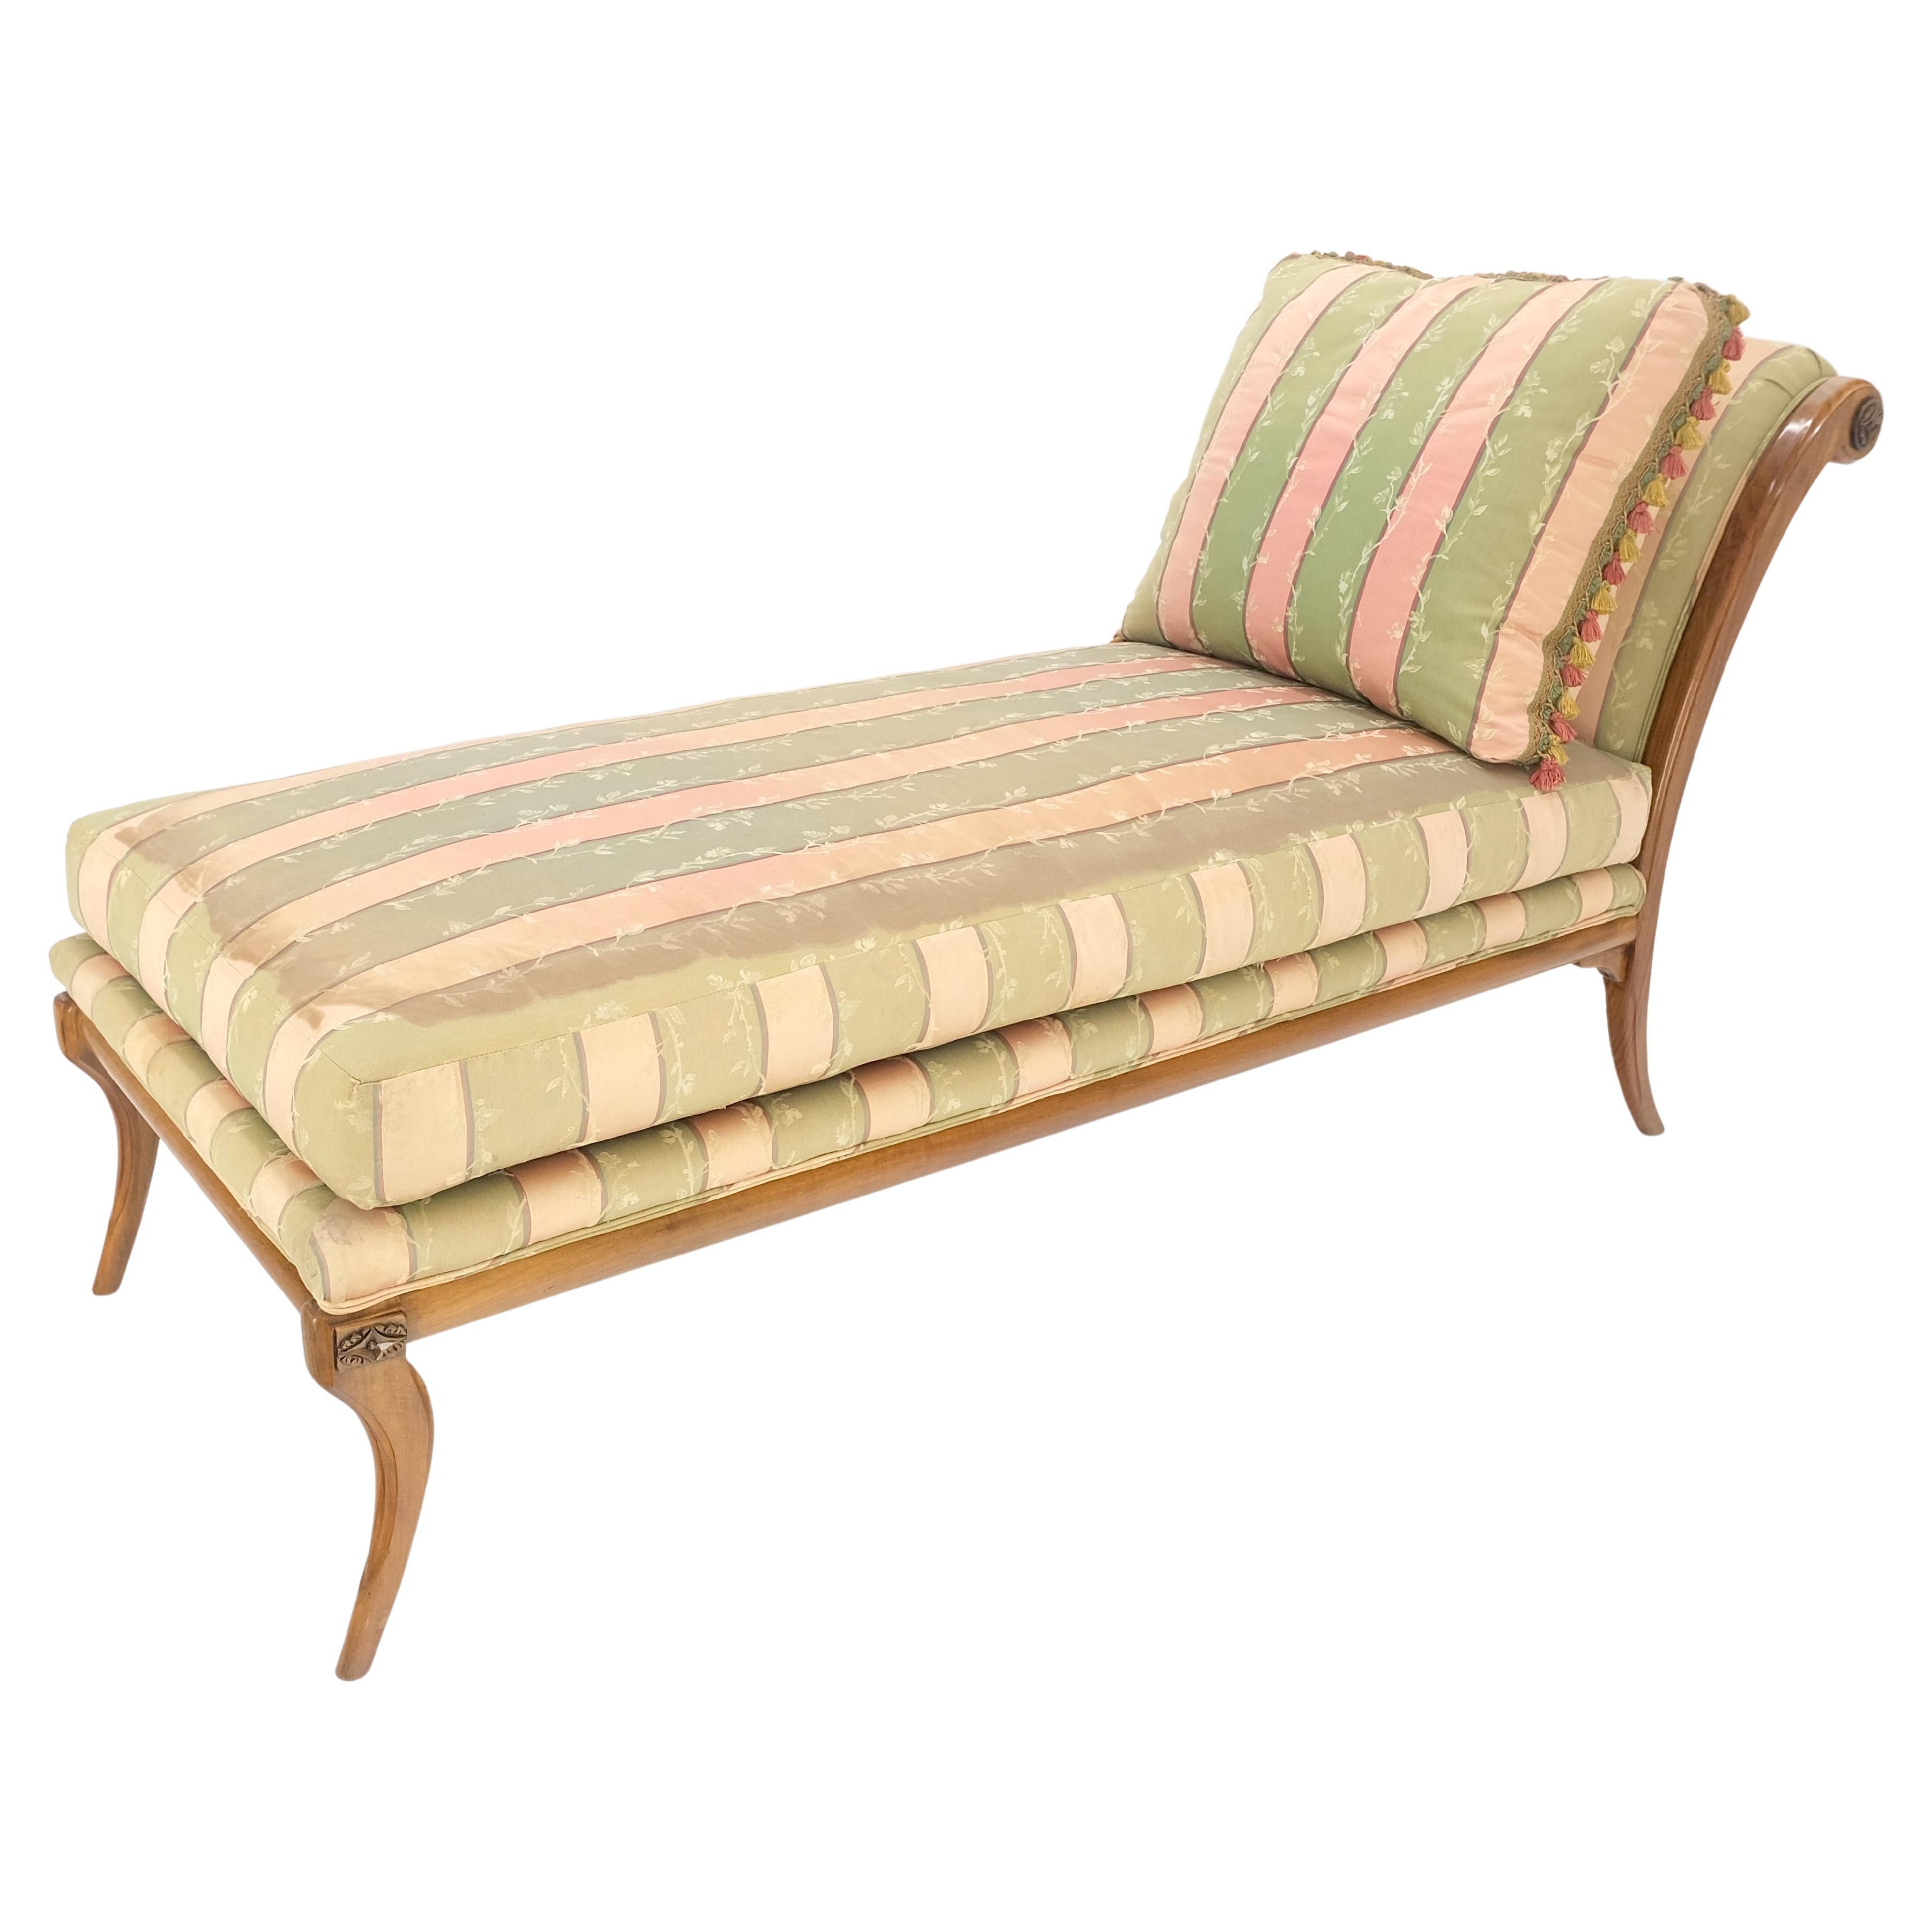 Klismos Light Carved Walnut Frame Chaise Lounge Chair Stunning MIINT Frame! New upholstery job included in the full price, buyer to provide fabric.